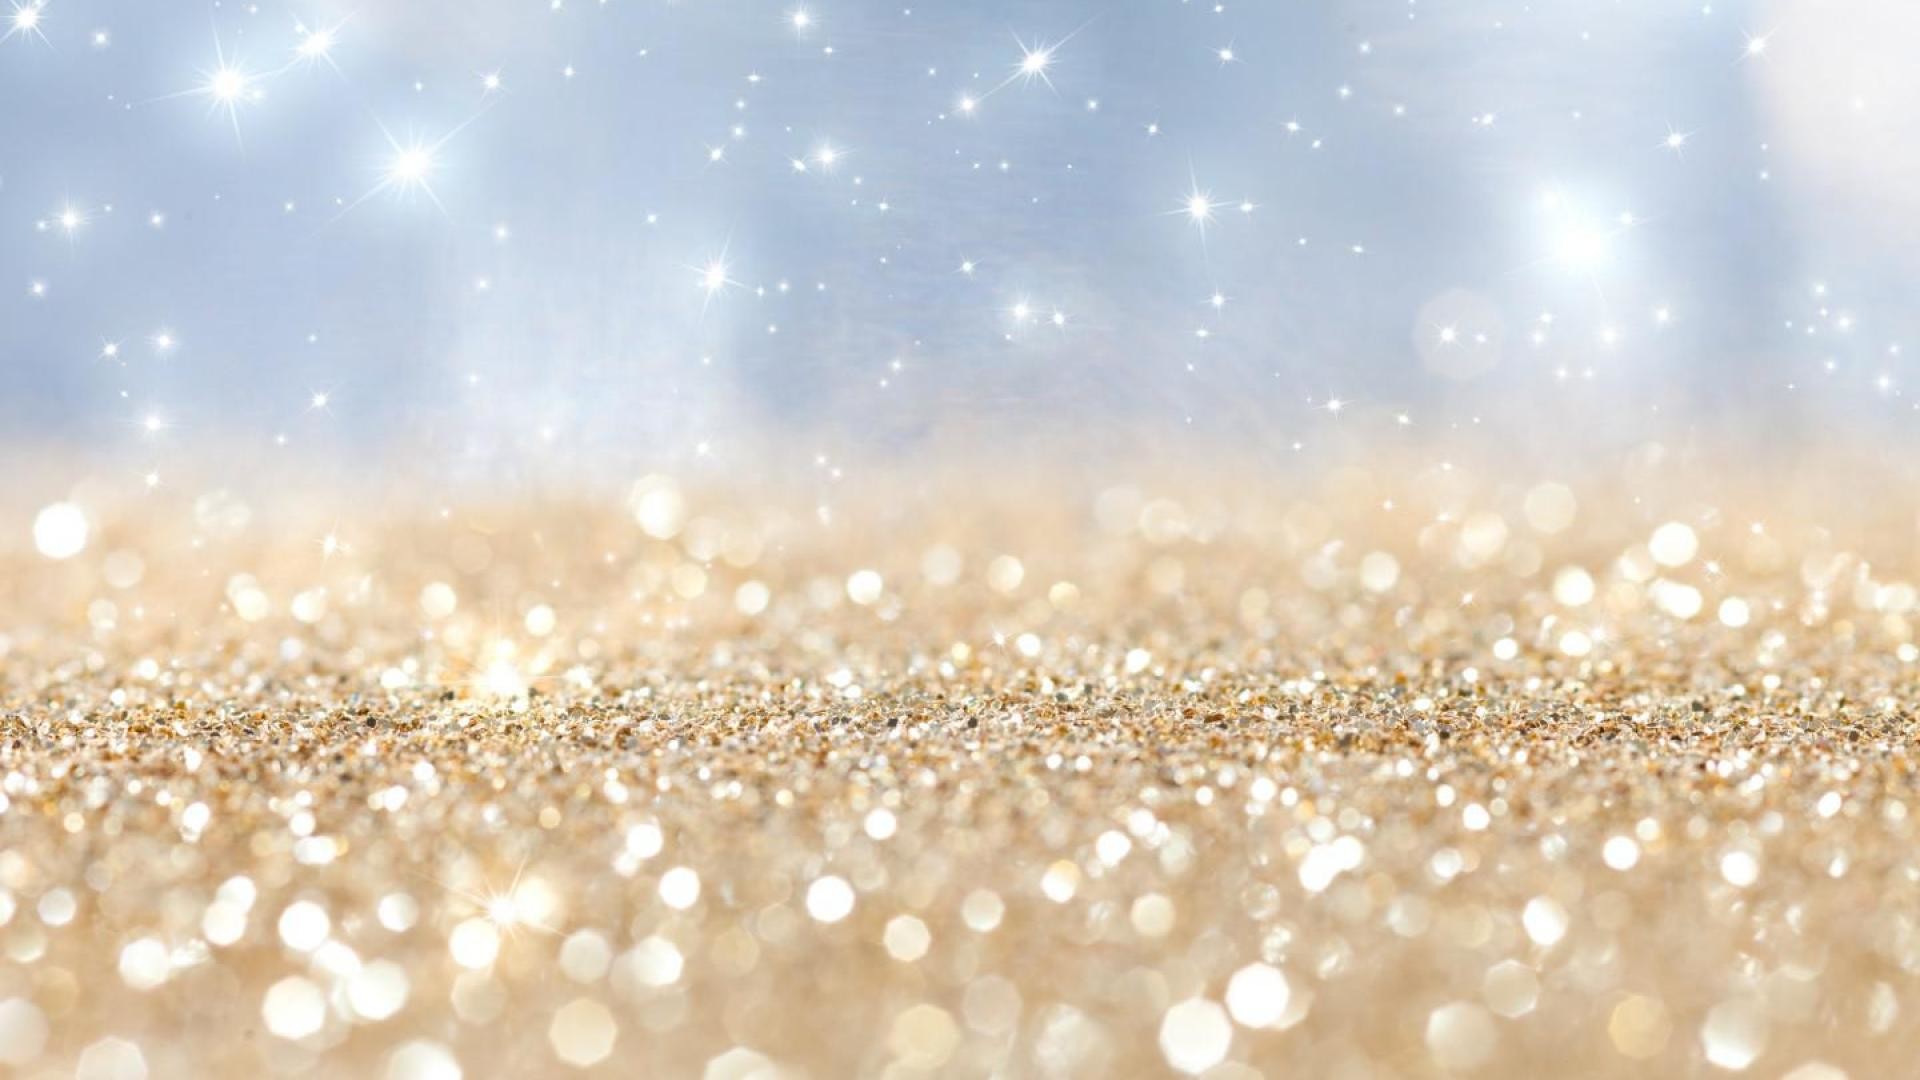 Sparkly Background Wallpaper (68+ images)